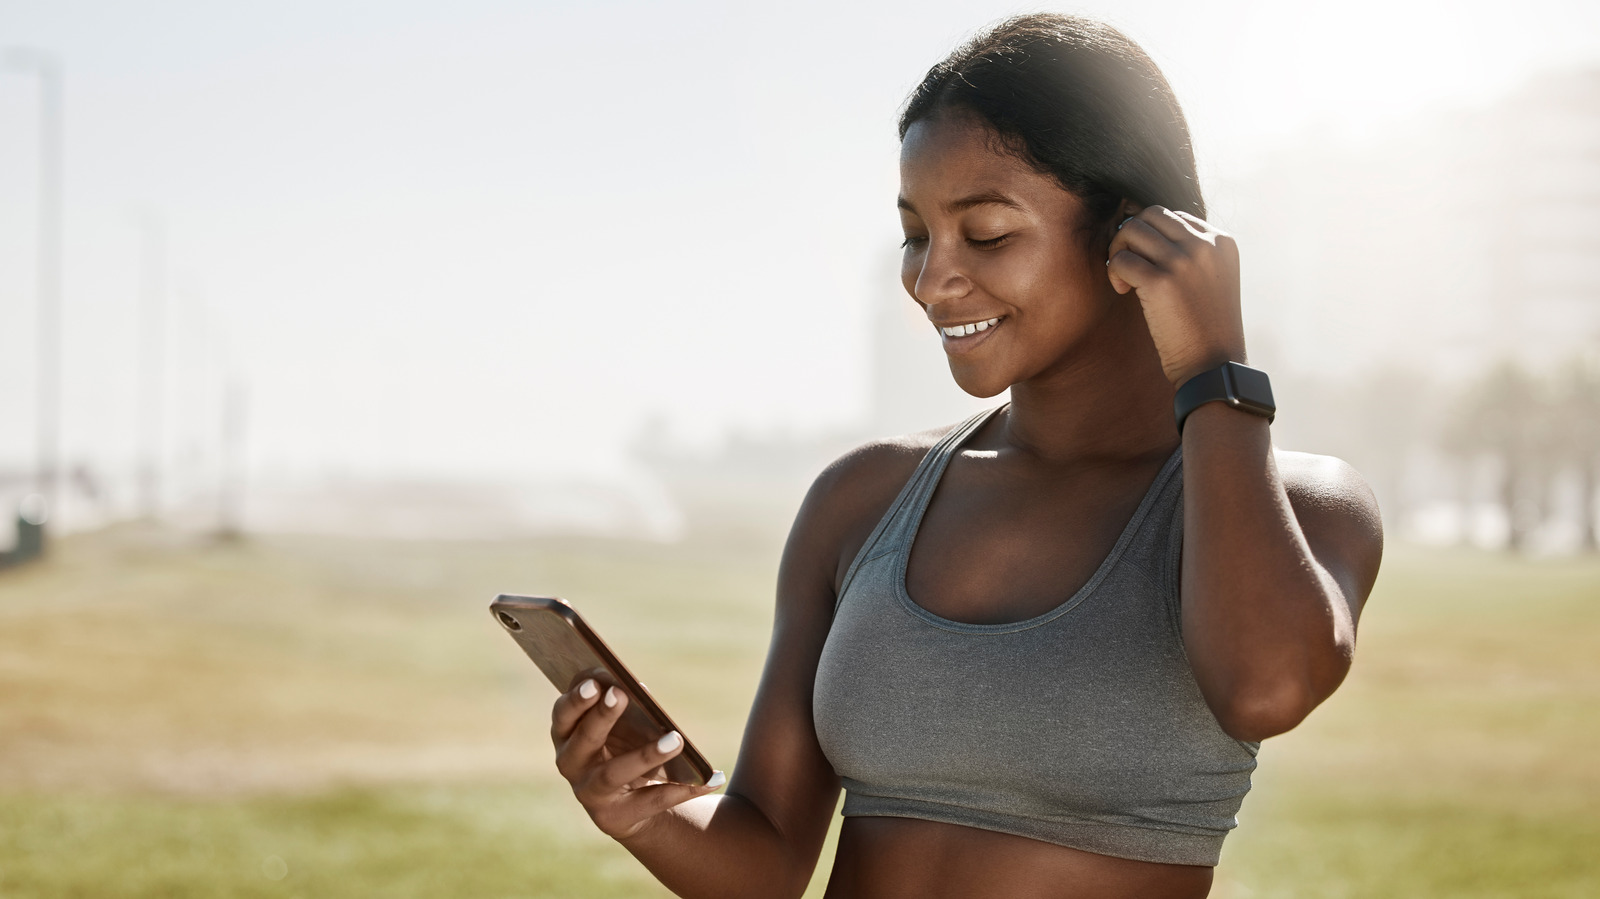 Woman with Headphones and Cell Phone in Sports Bra